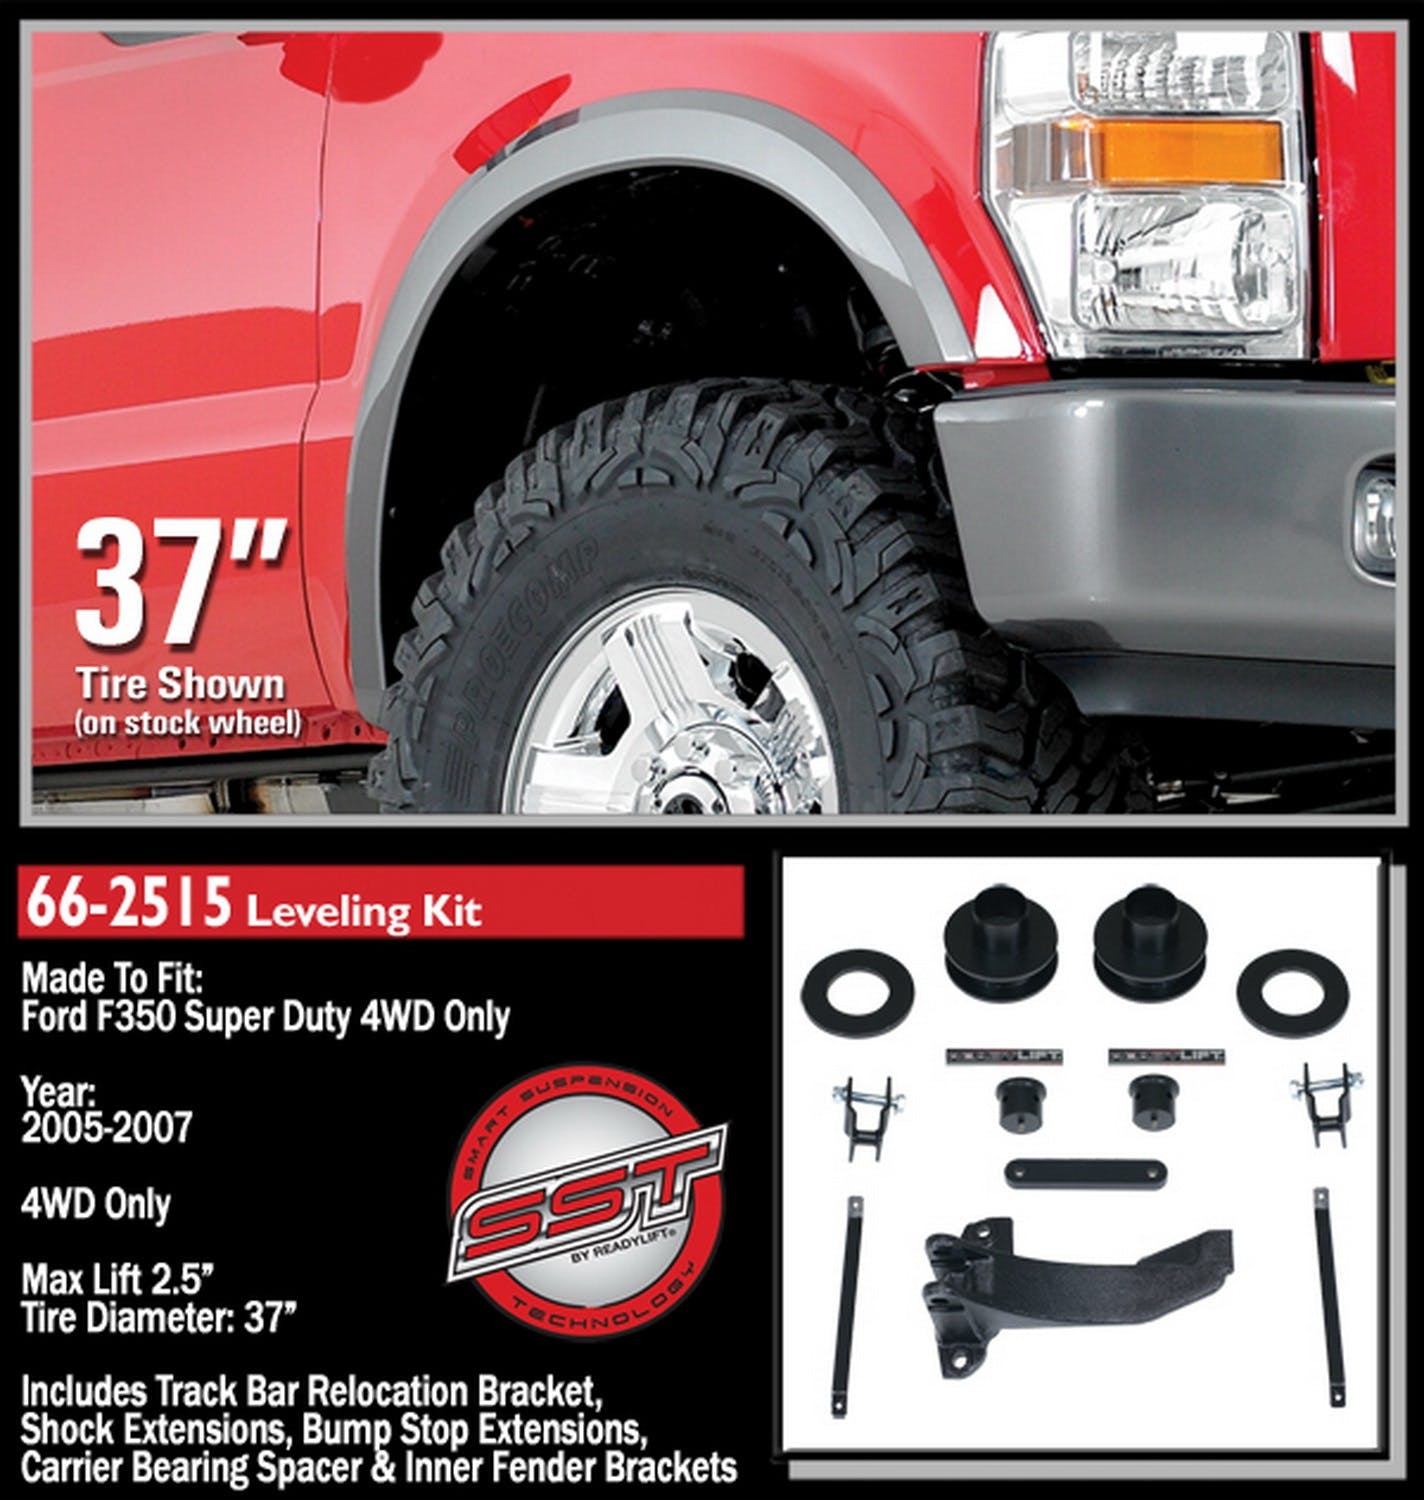 ReadyLIFT 66-2515 2.5" Front Suspension Leveling Kit with Track Bar Bracket